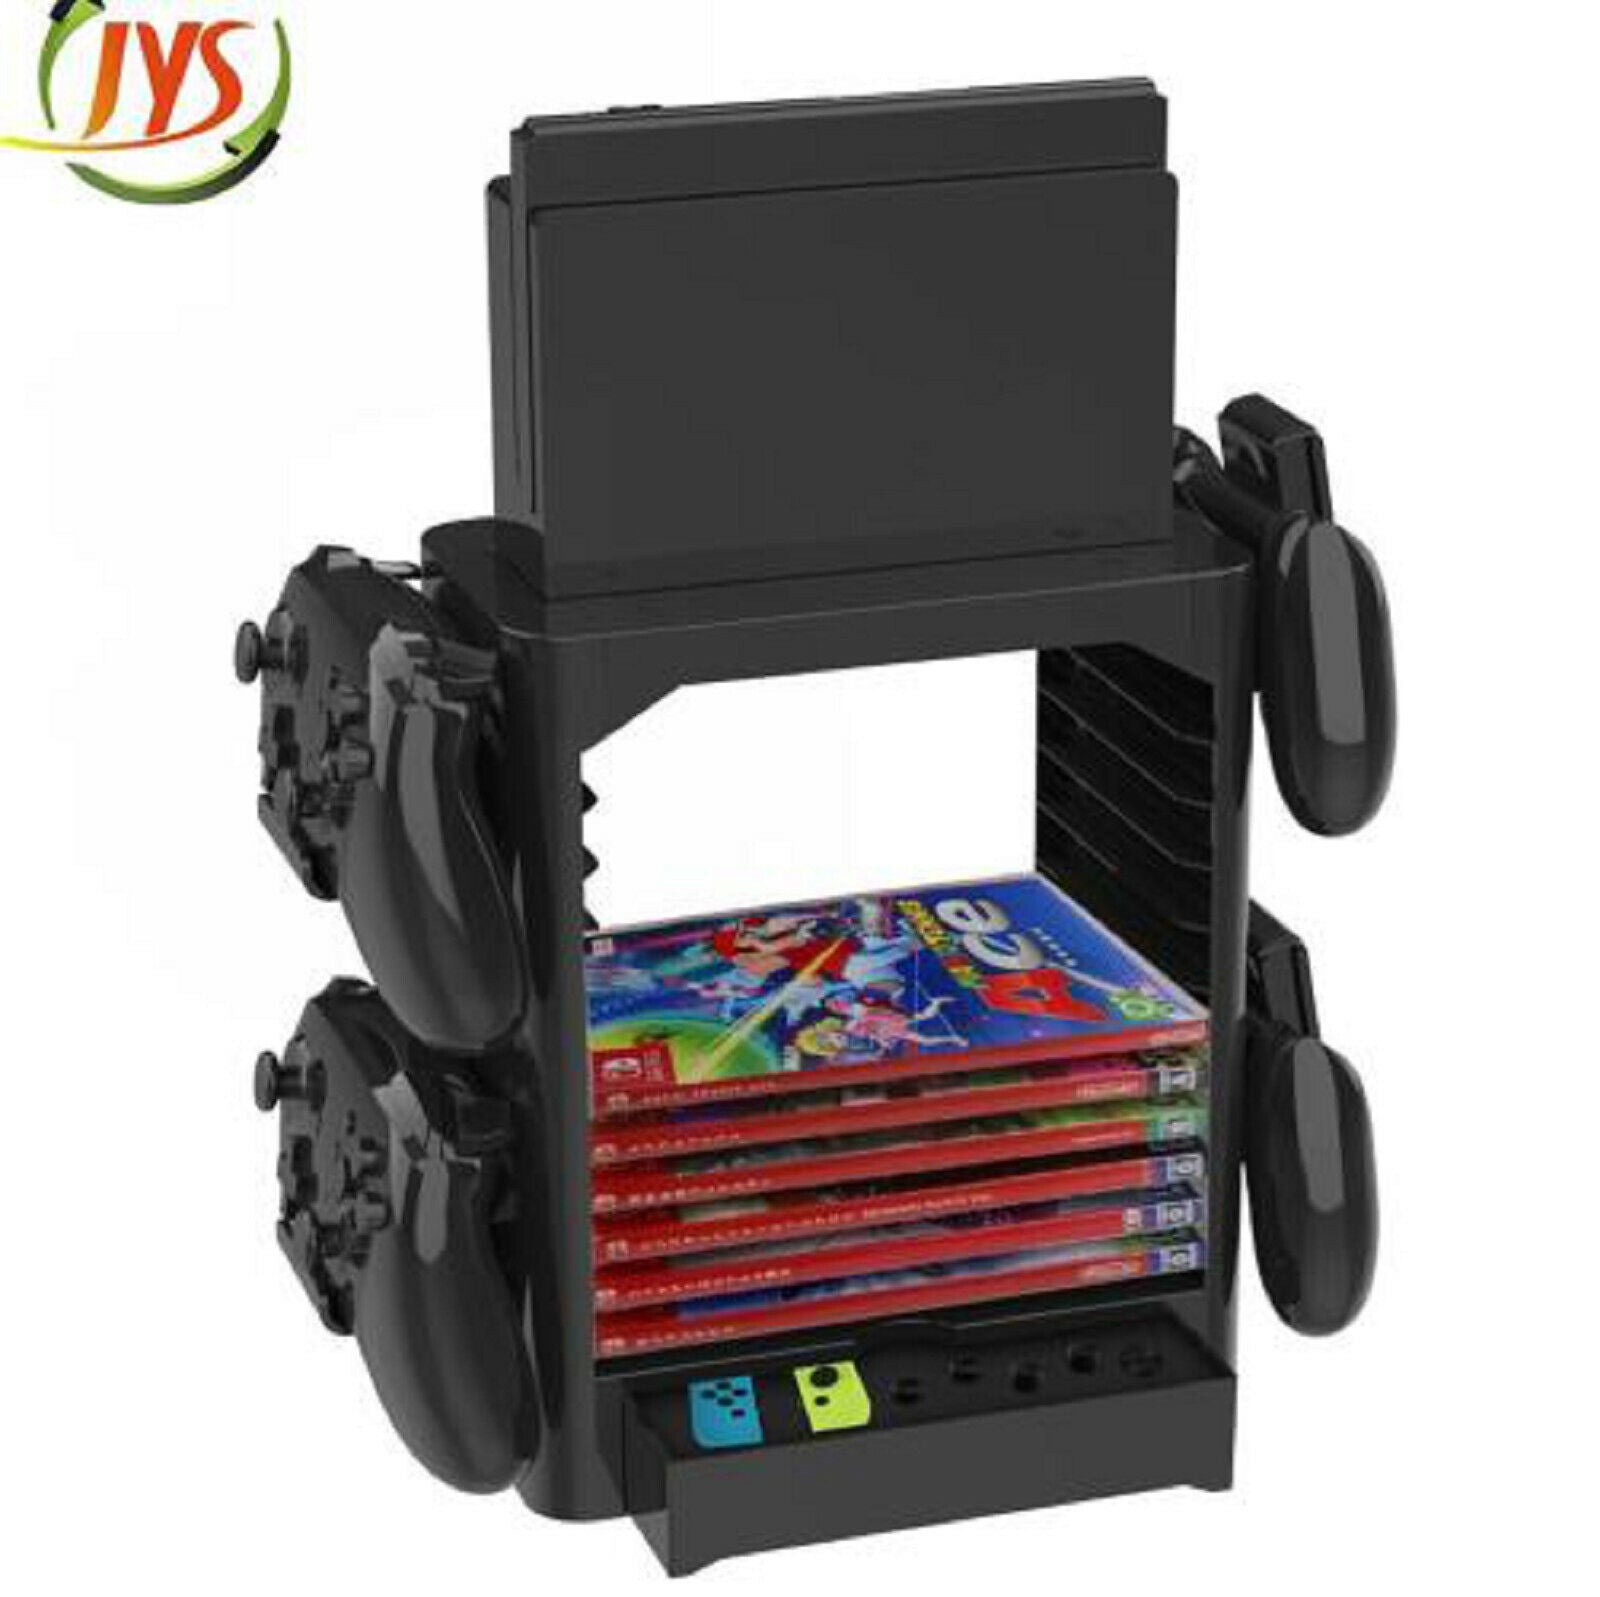 Game Card Storage Shelf Stand Gamepad Console Holder Bracket For Switch NEW